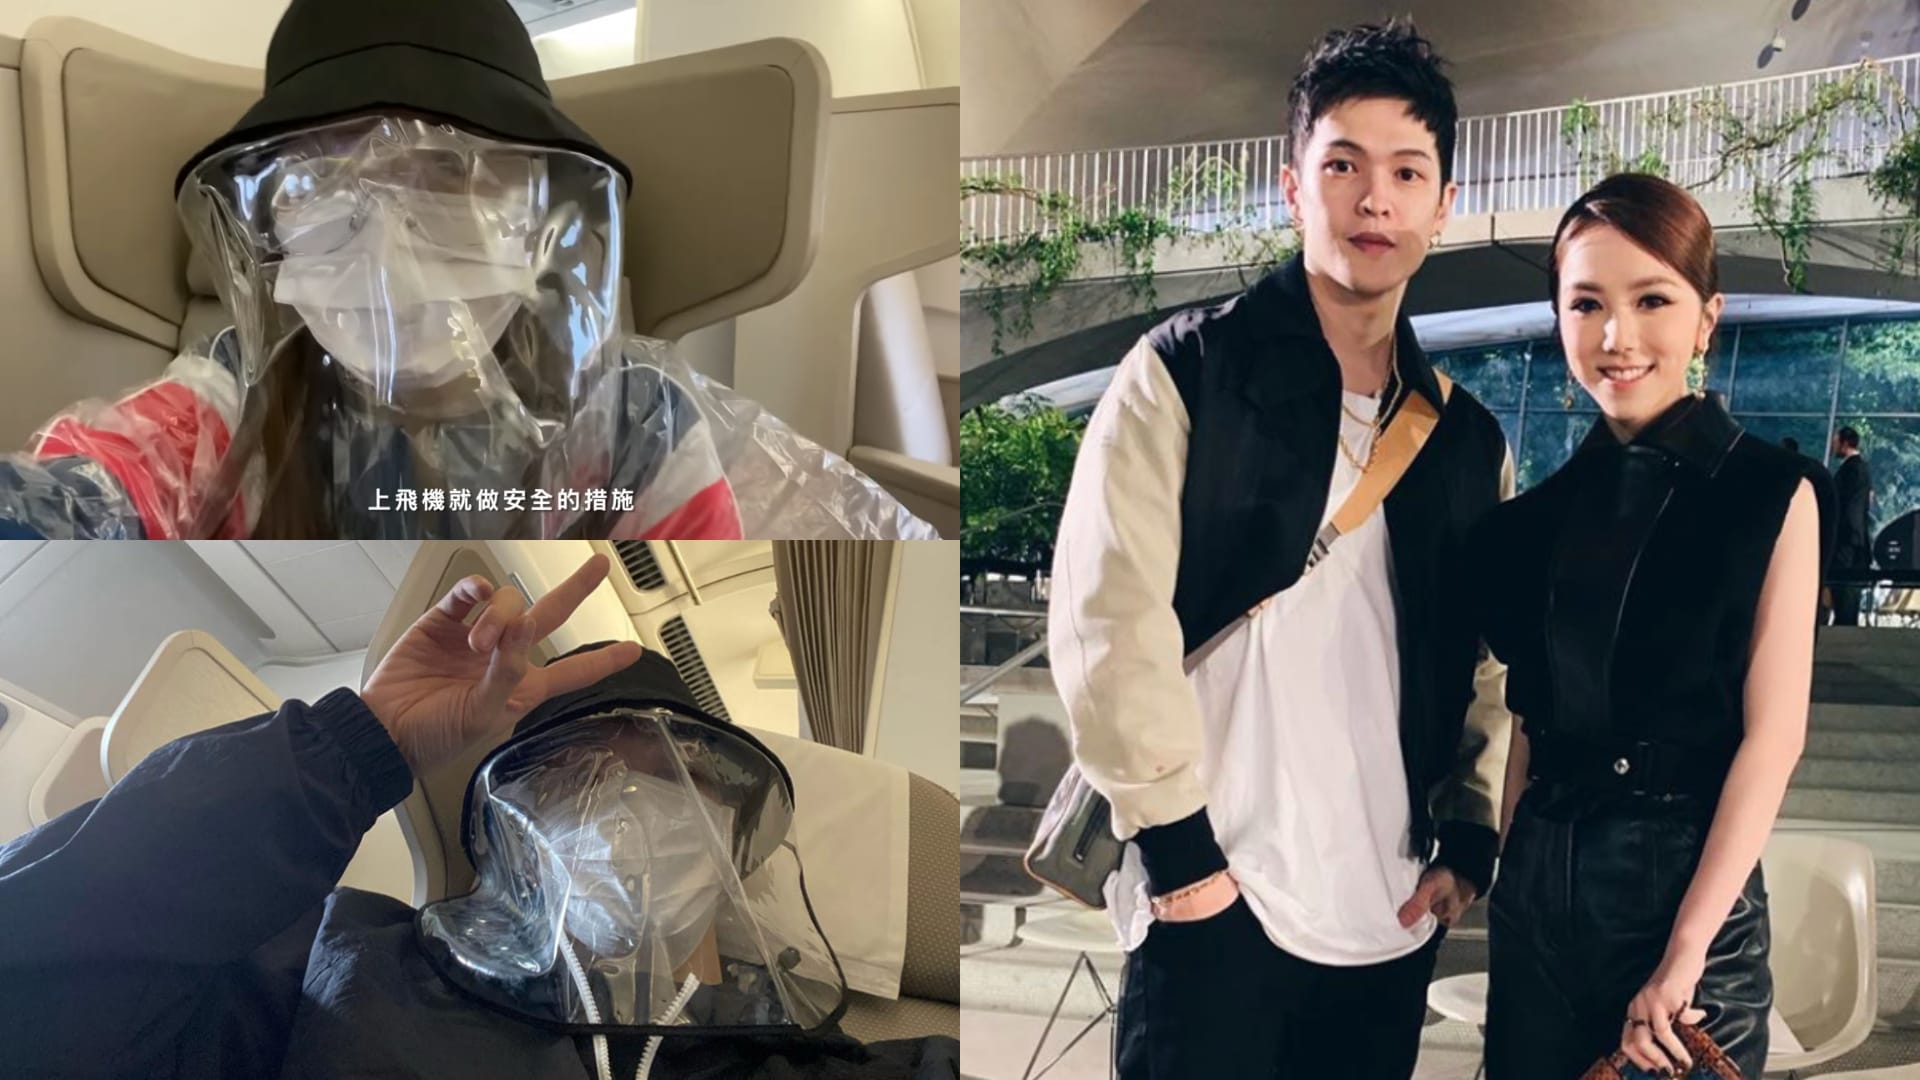 G.E.M Travels To Shanghai With Stylist Boyfriend, But They Have To Self-Quarantine In Separate Rooms For 14 Days